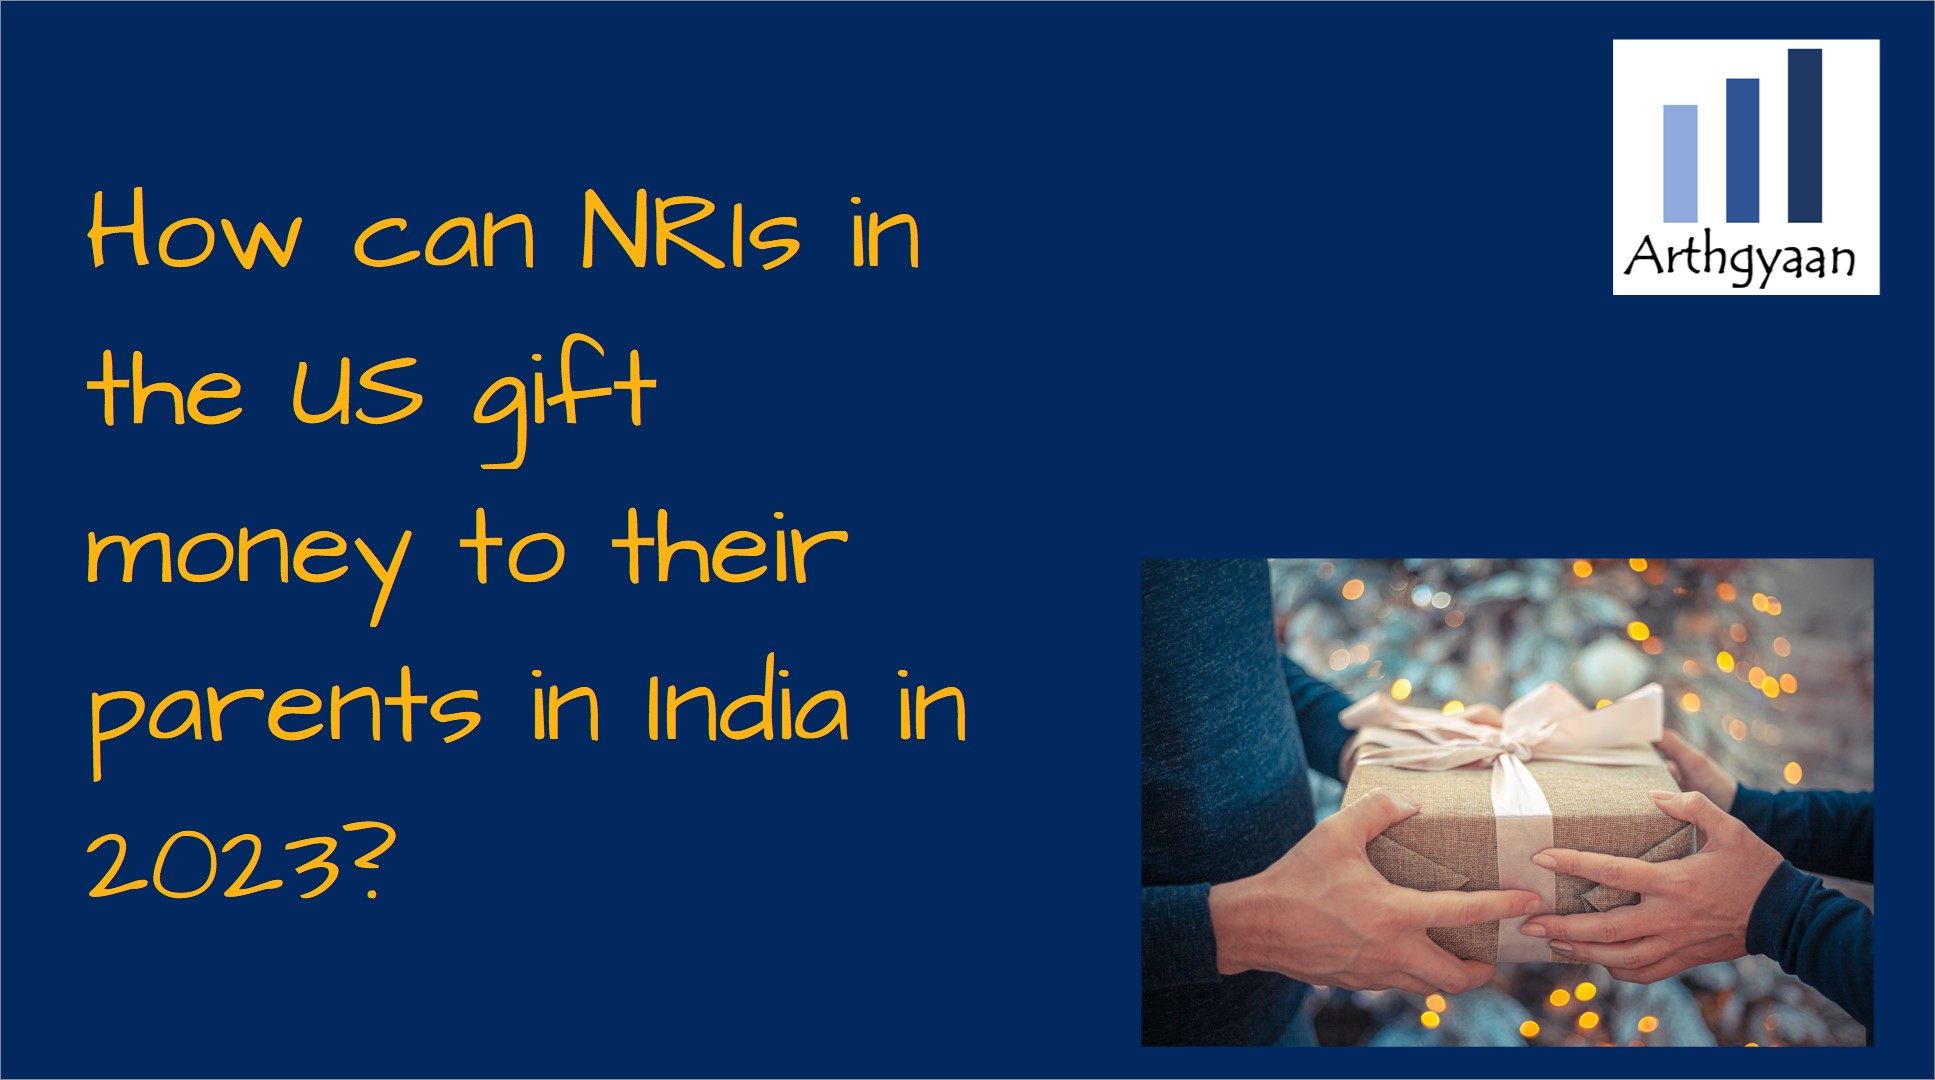 How can NRIs in the US gift money to their parents in India in 2023?